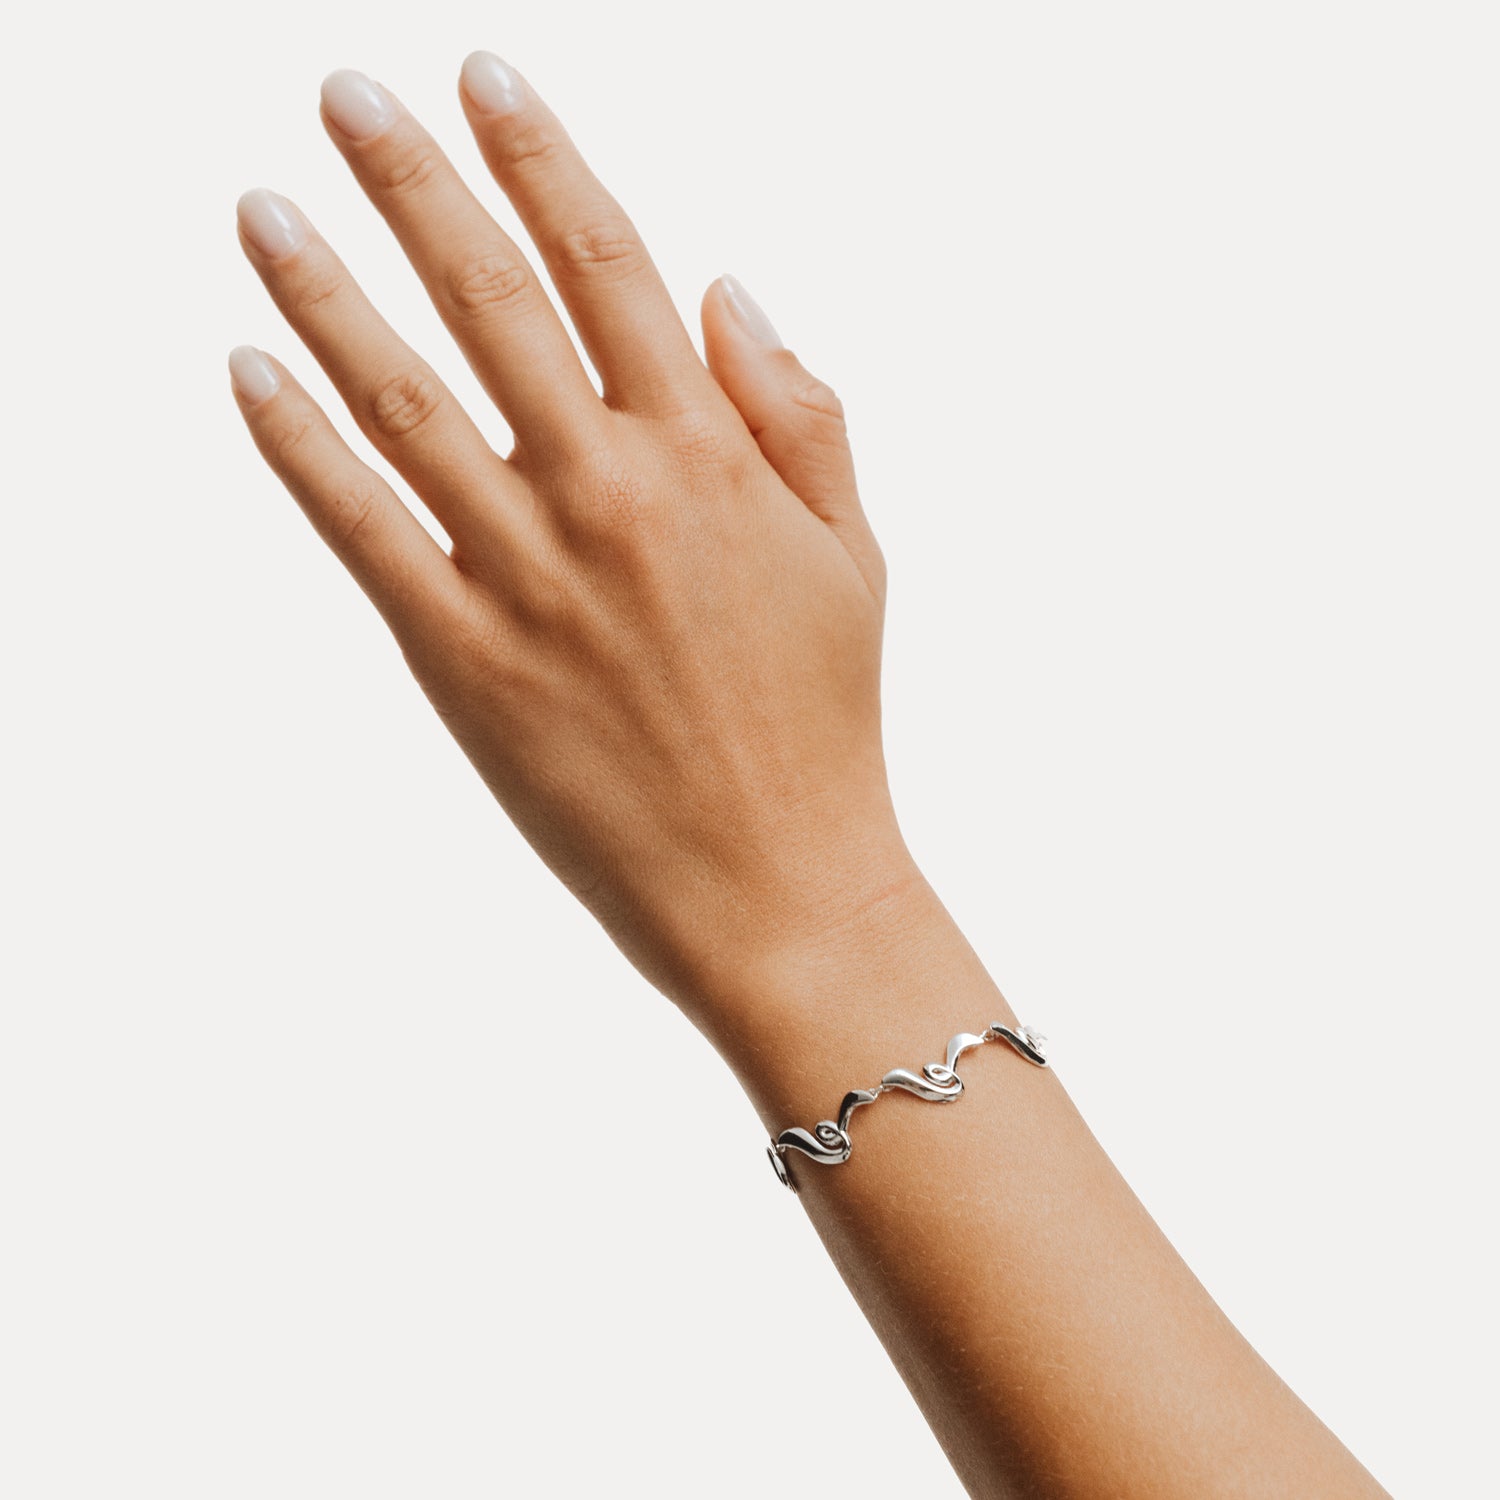 Poise Twirl Chain Bracelet, recycled Sterling Silver, shown on hand - VEYIA Berlin